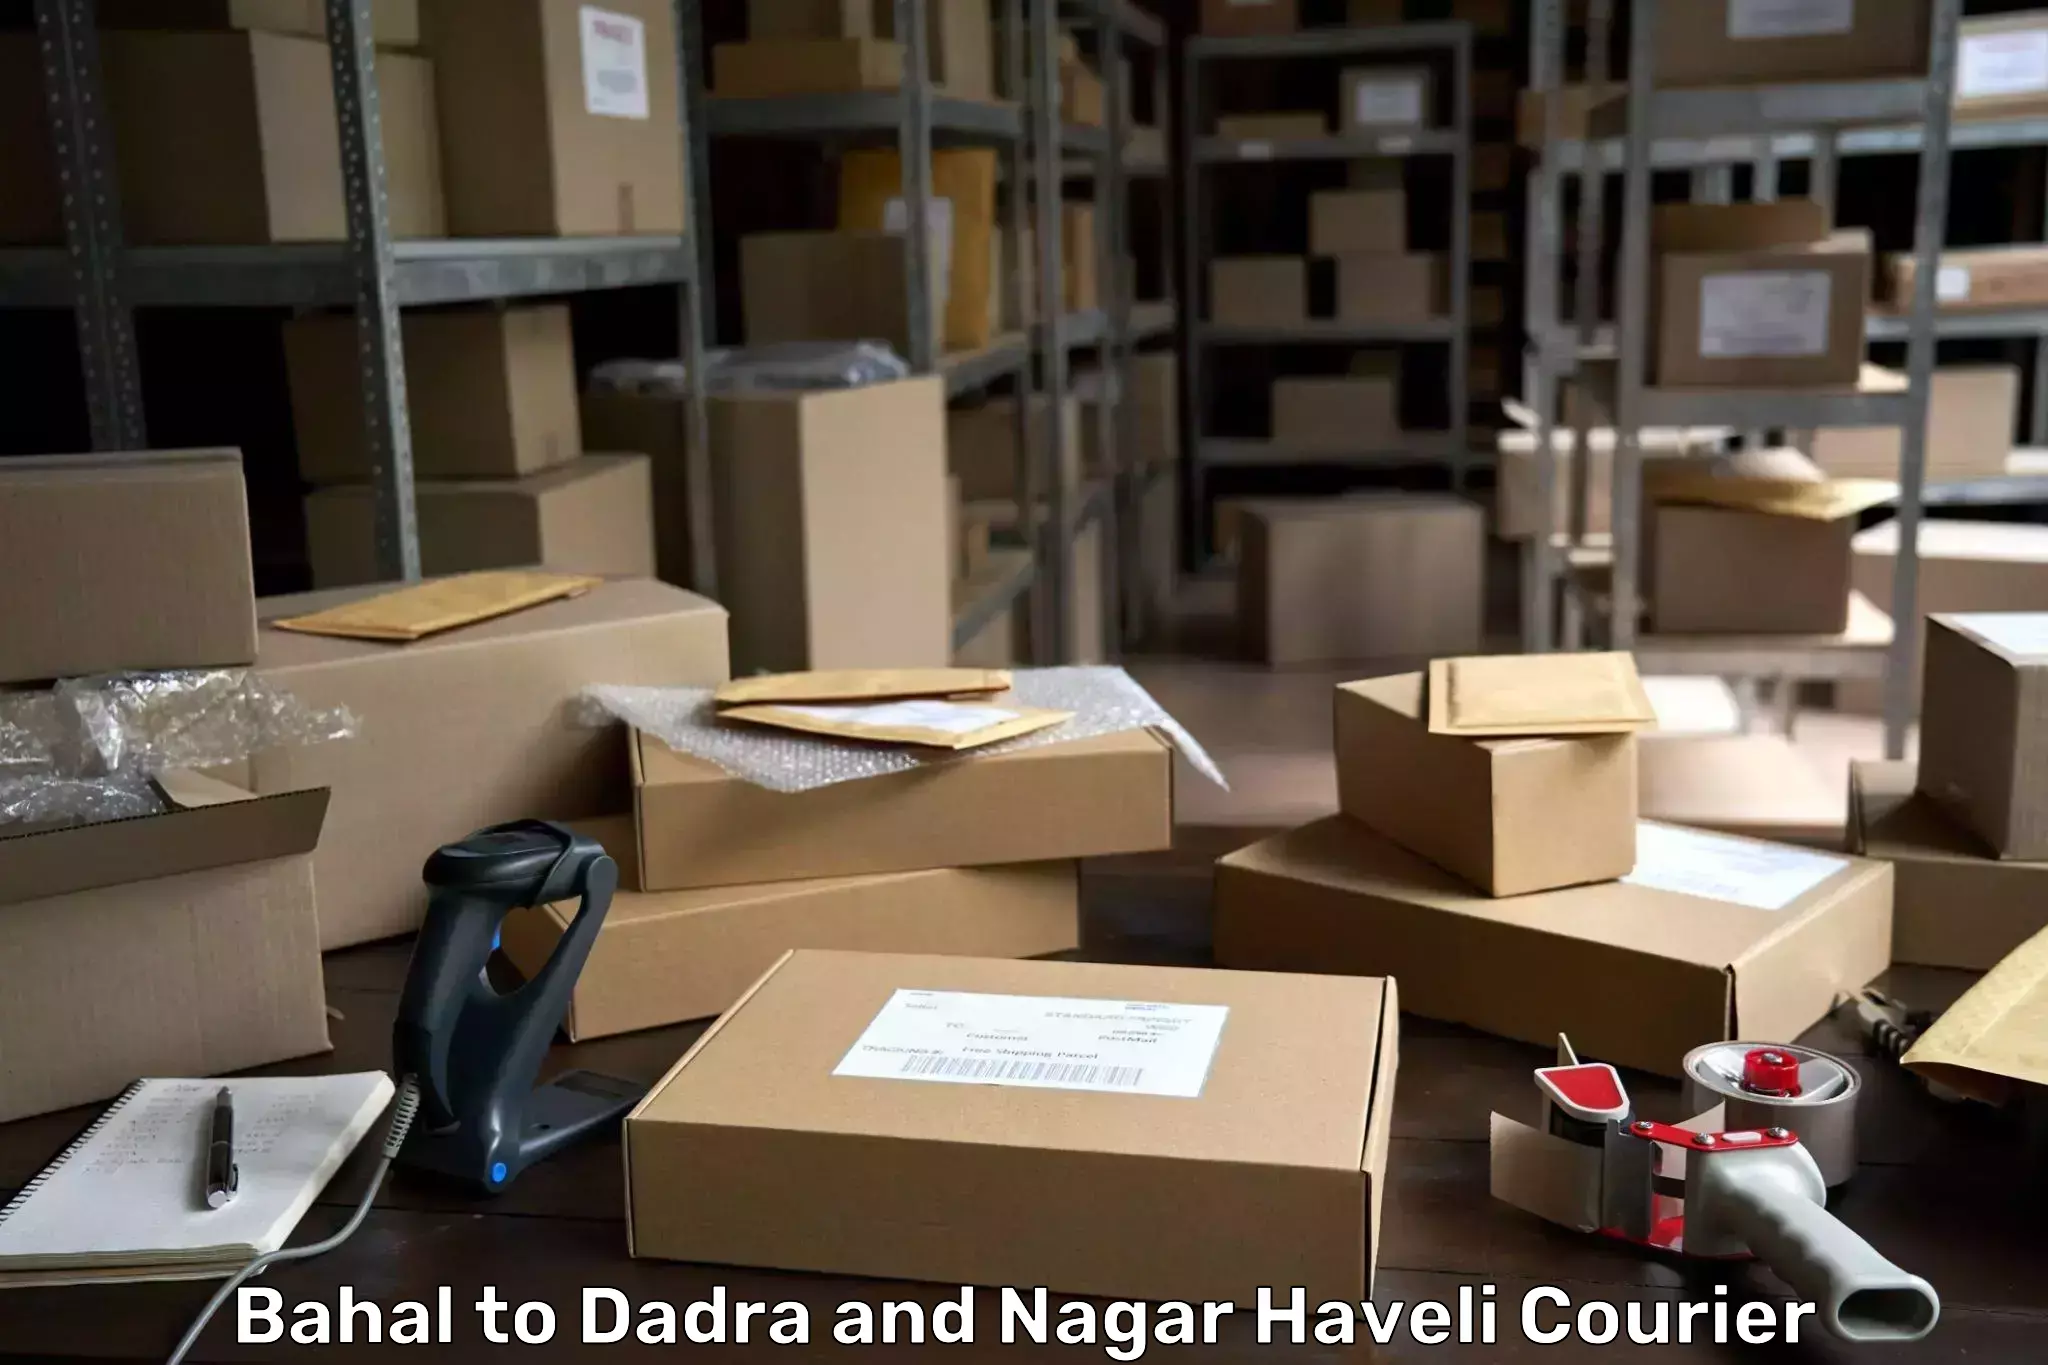 Professional parcel services Bahal to Dadra and Nagar Haveli